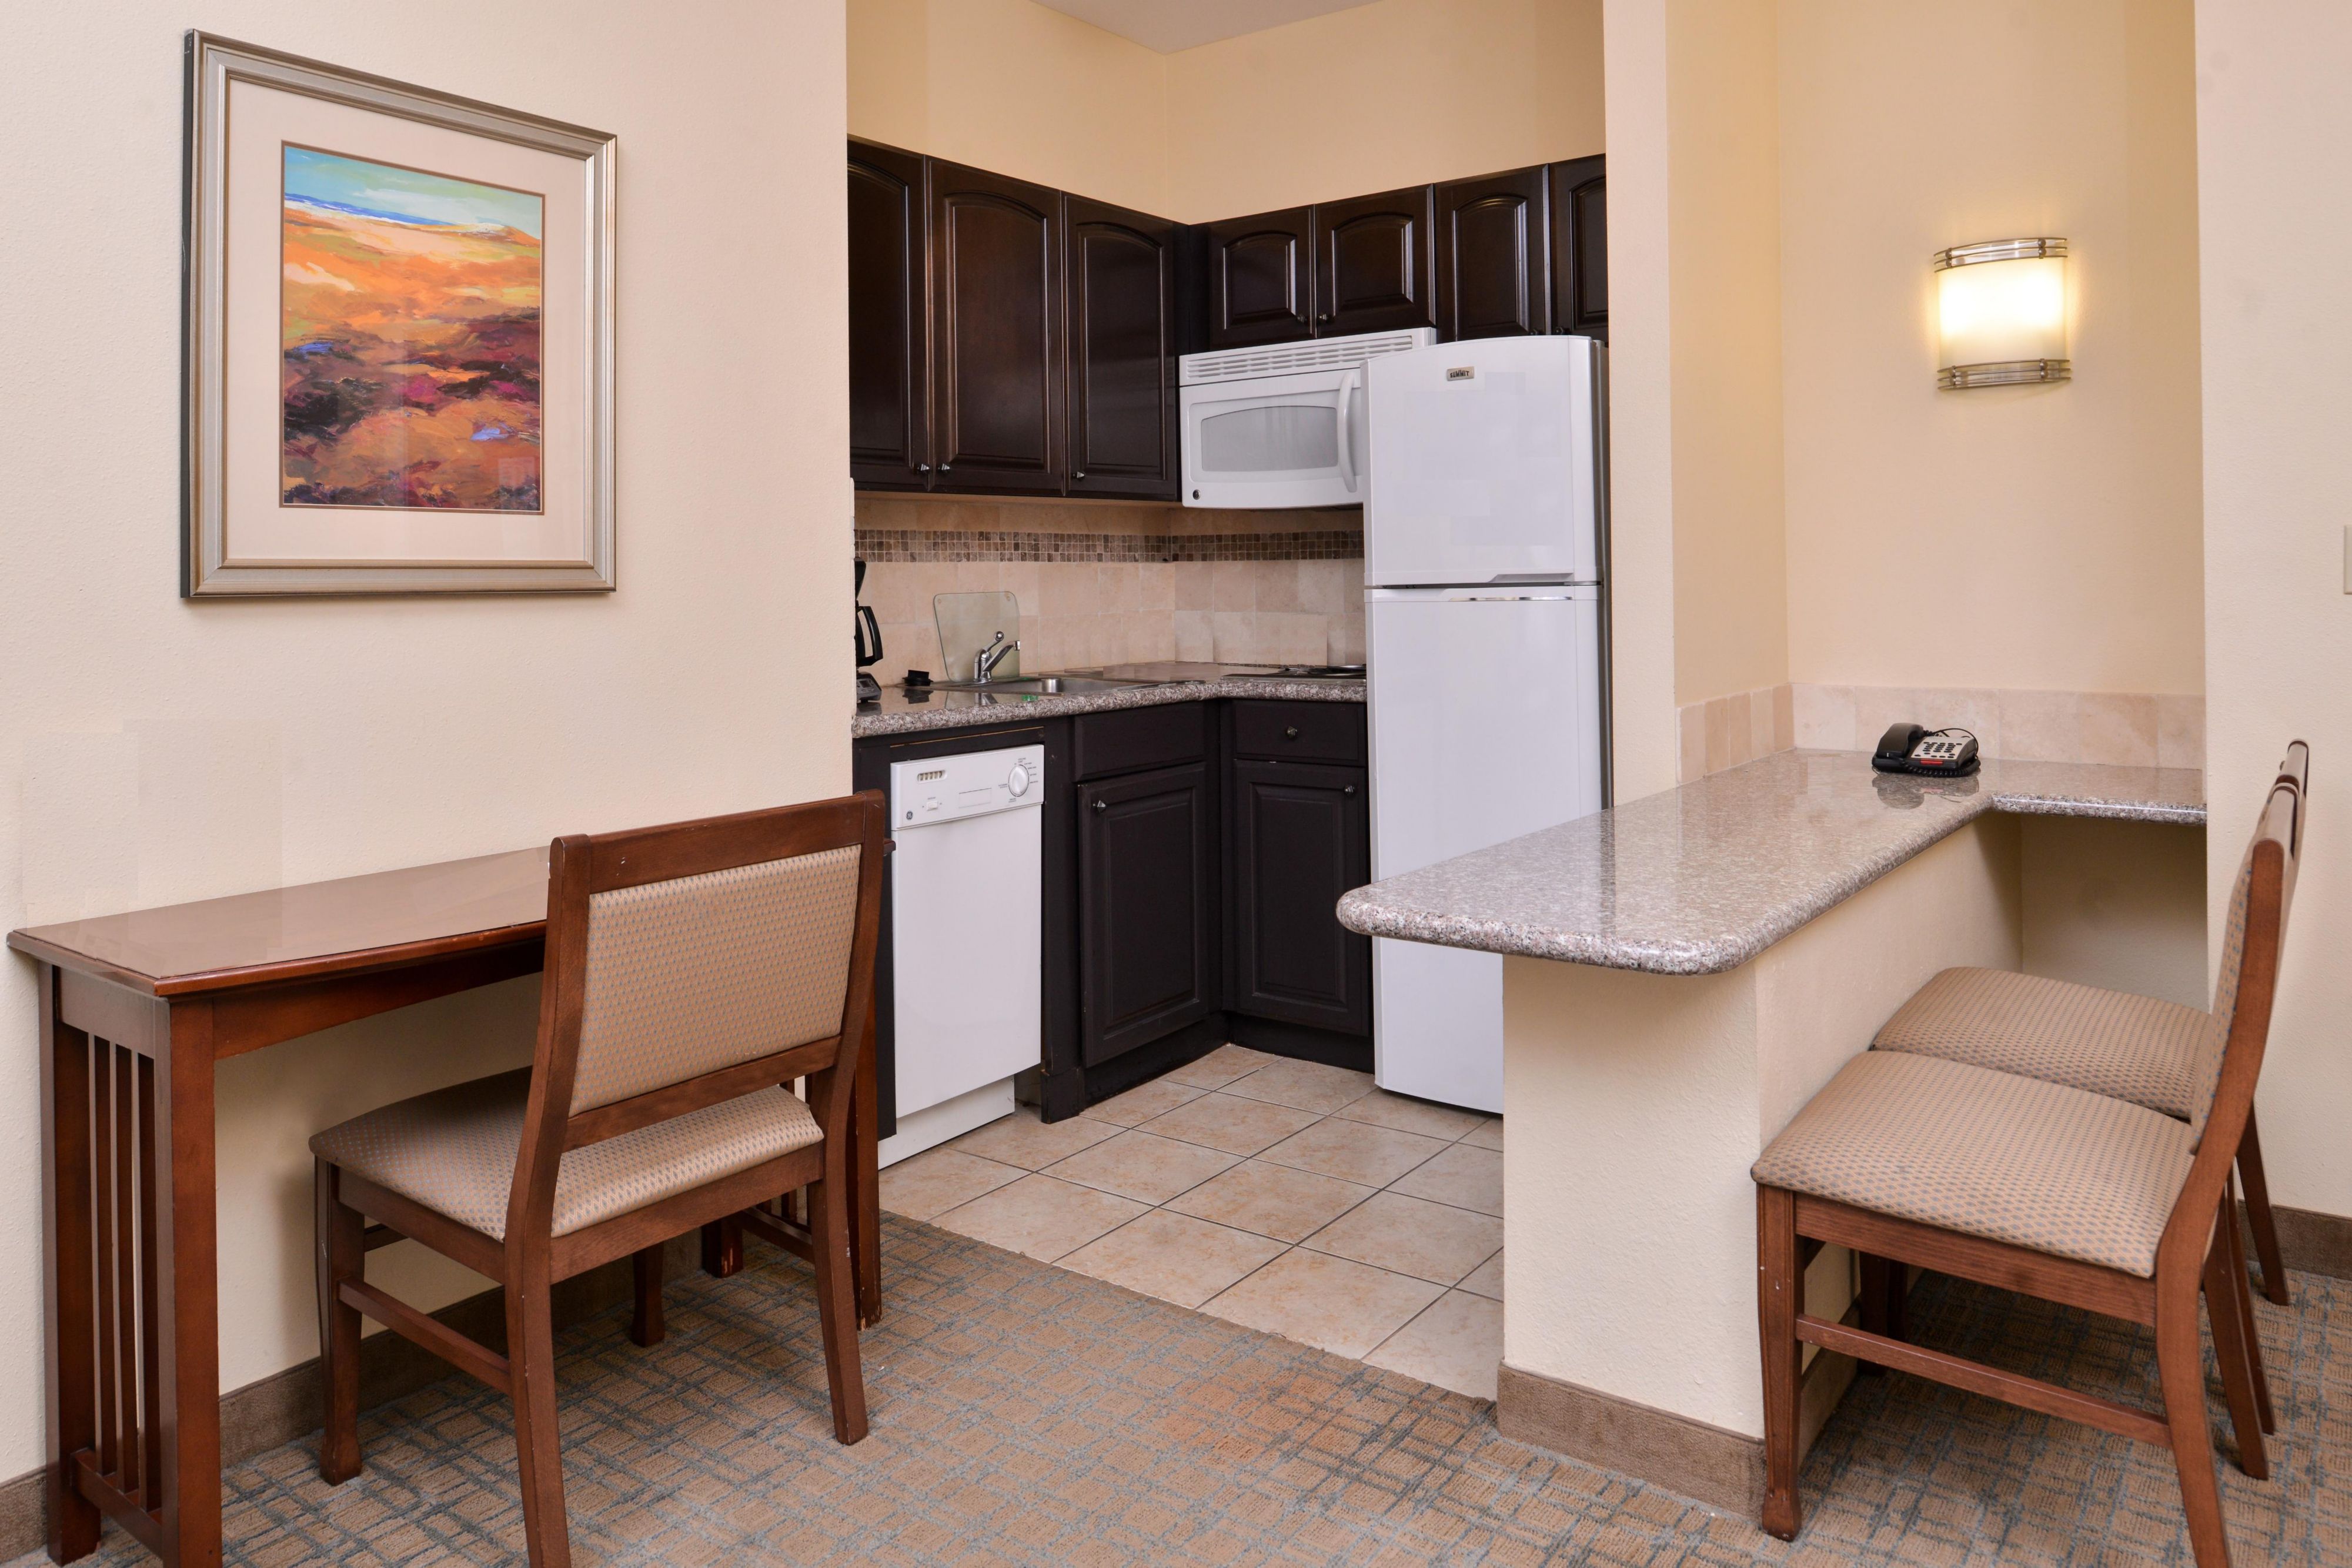 Enjoy all the comforts of home in our apartment-style suites with full kitchens. You'll have everything you need to make a great meal on the road with the ensuite stove, microwave oven, refrigerator, and cooking utensils.